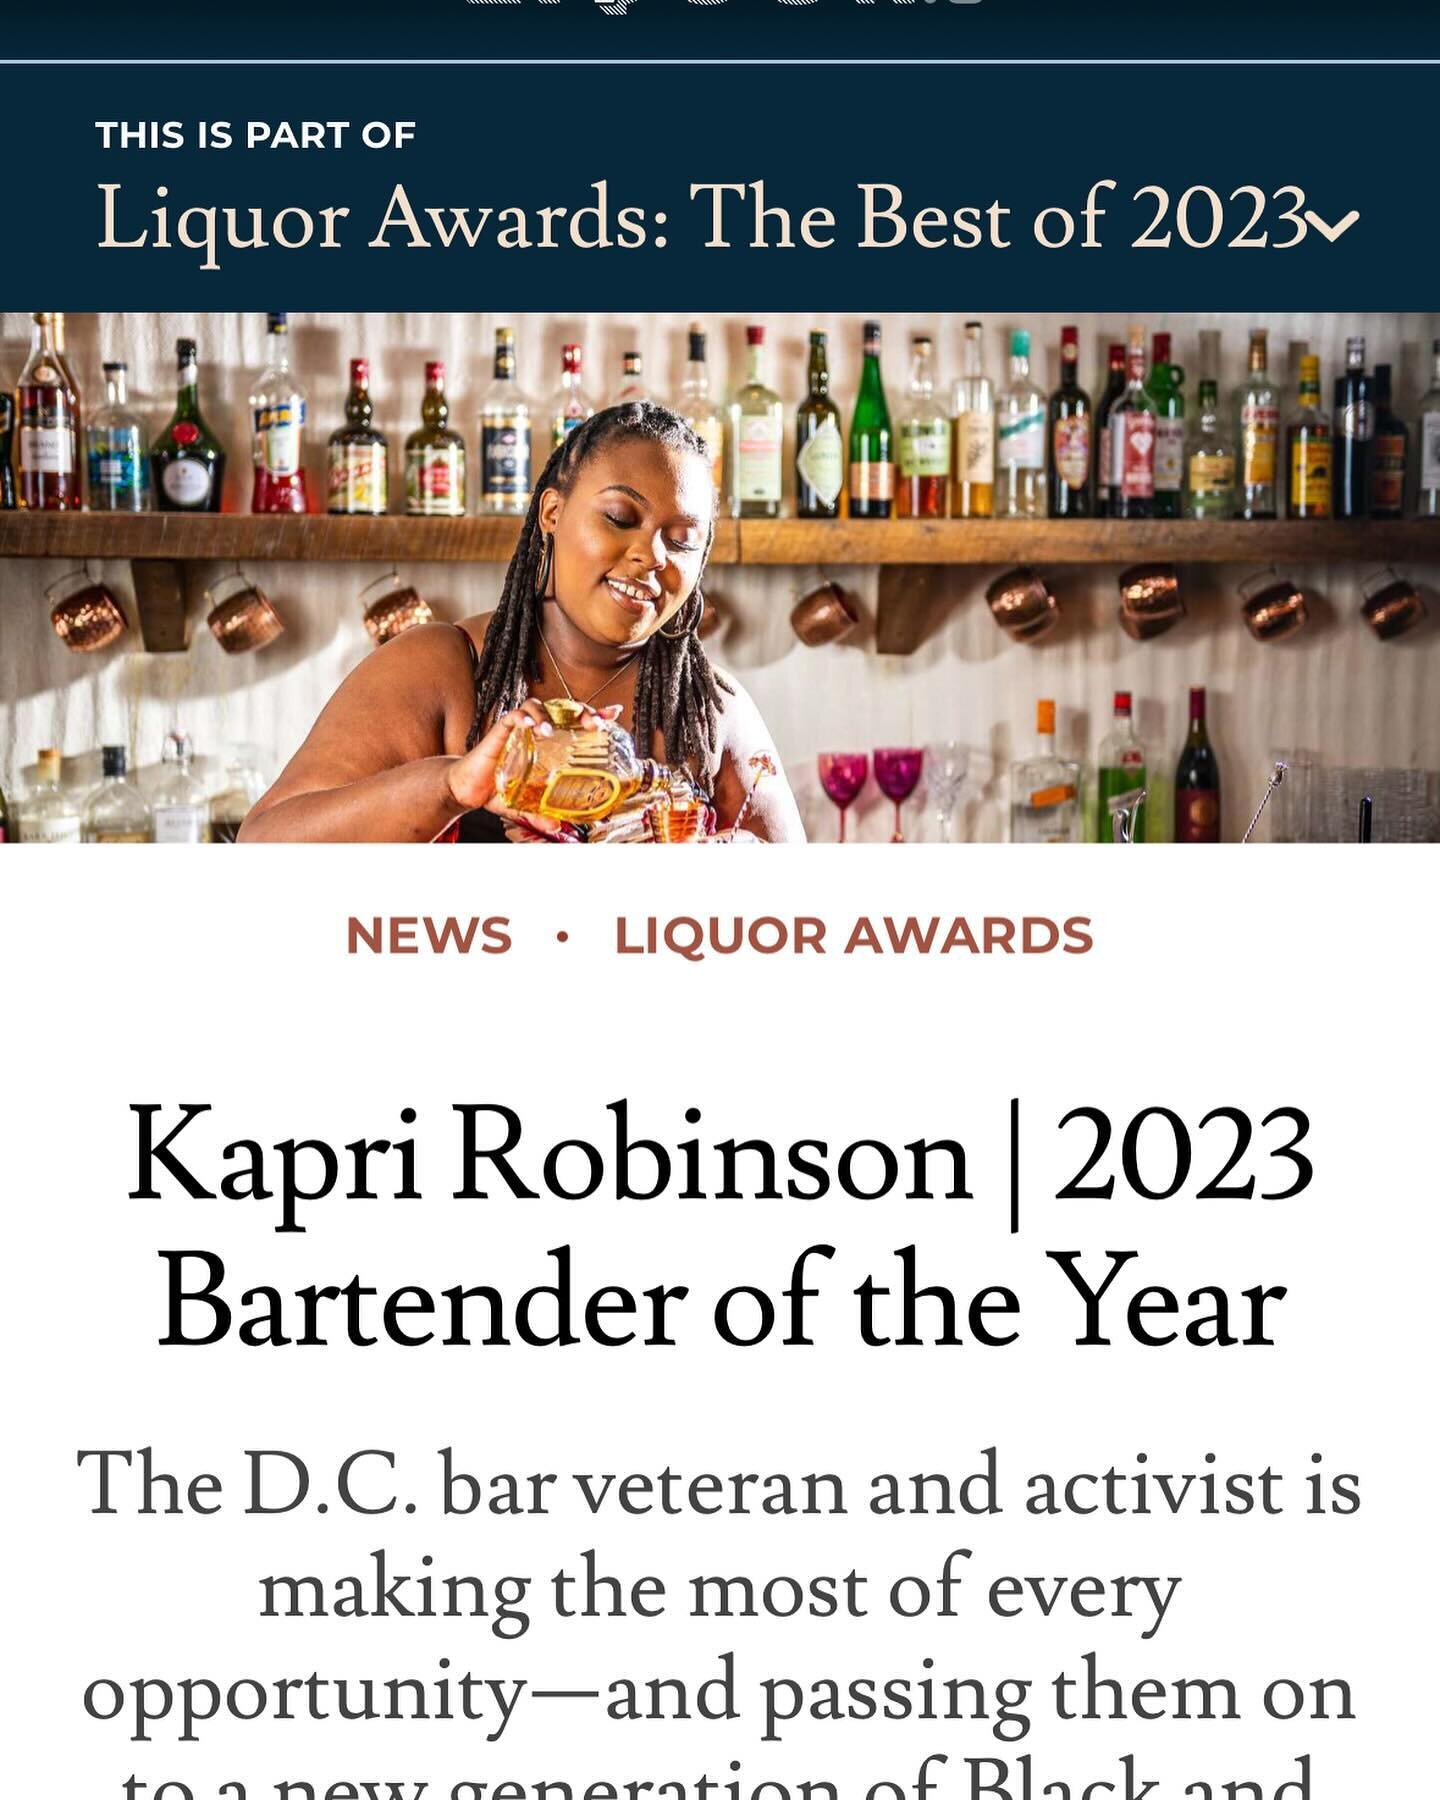 ✨We&rsquo;re so excited looking at this year&rsquo;s @liquor Awards!! ✨

So many folks of color are celebrated throughout these different awards and we feel so great to know and be in community with most of them! 

When we see Black and Brown individ